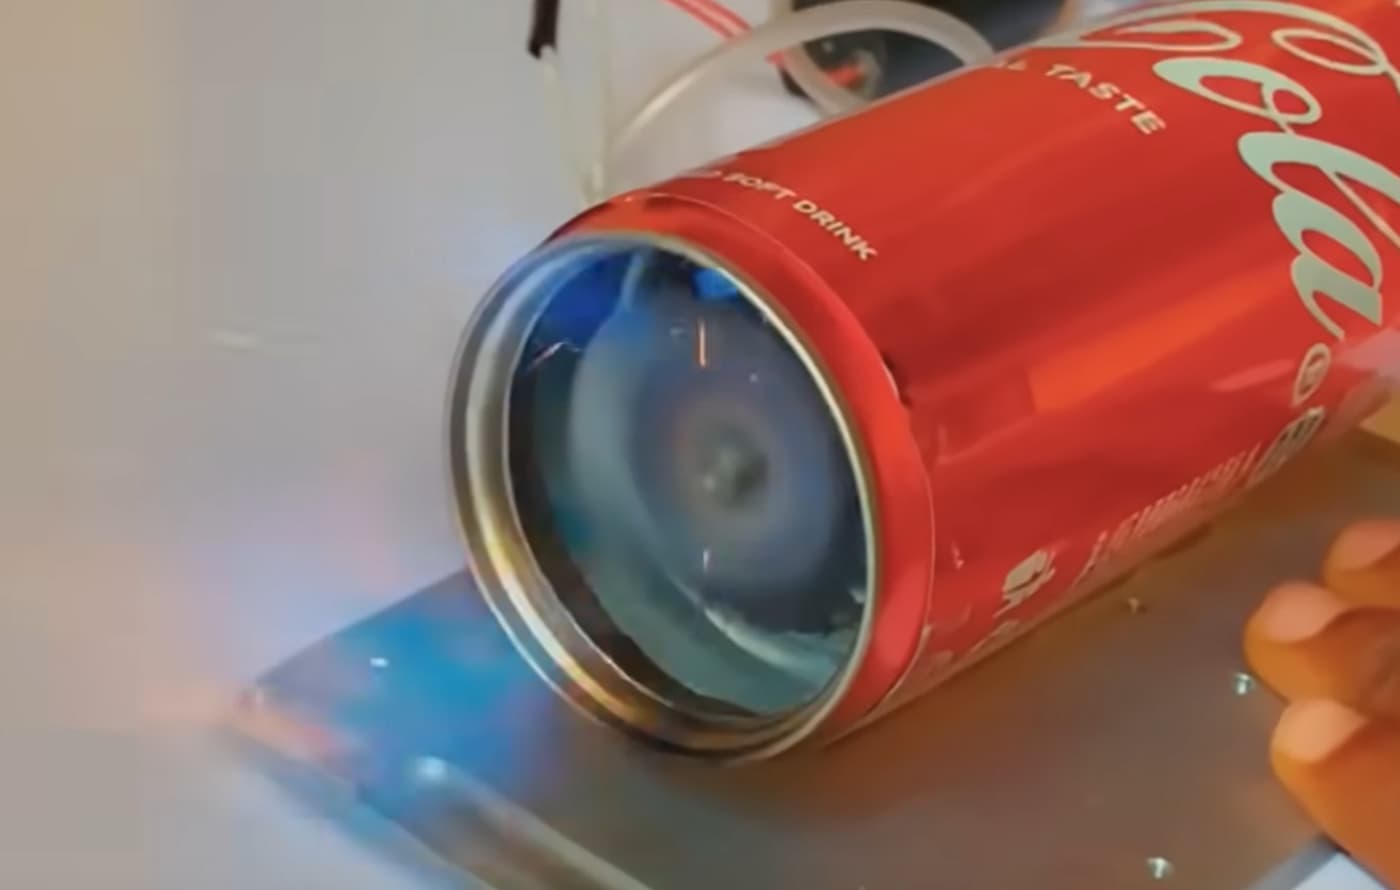 A Fully Functional Jet Engine using a Soda Can